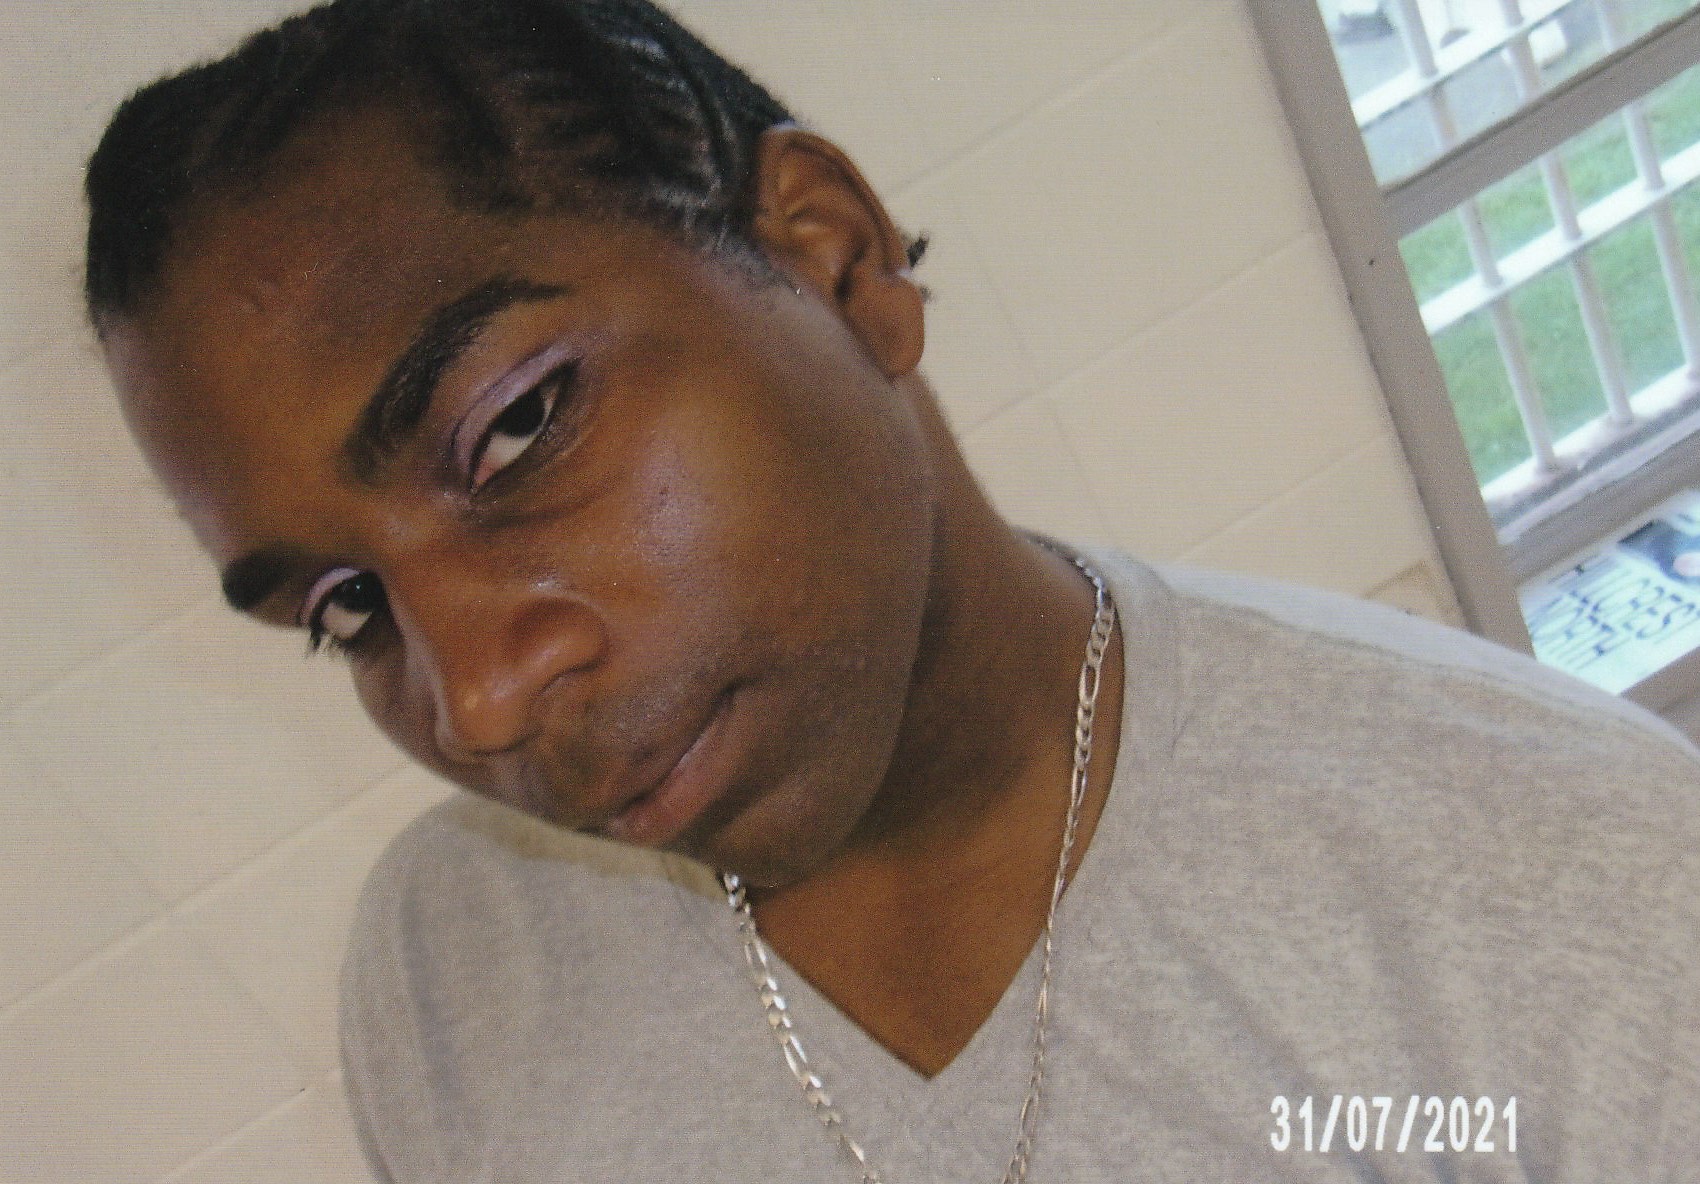 The transgender woman who impregnated 2 women in prison now fears for her life Opinion photo pic